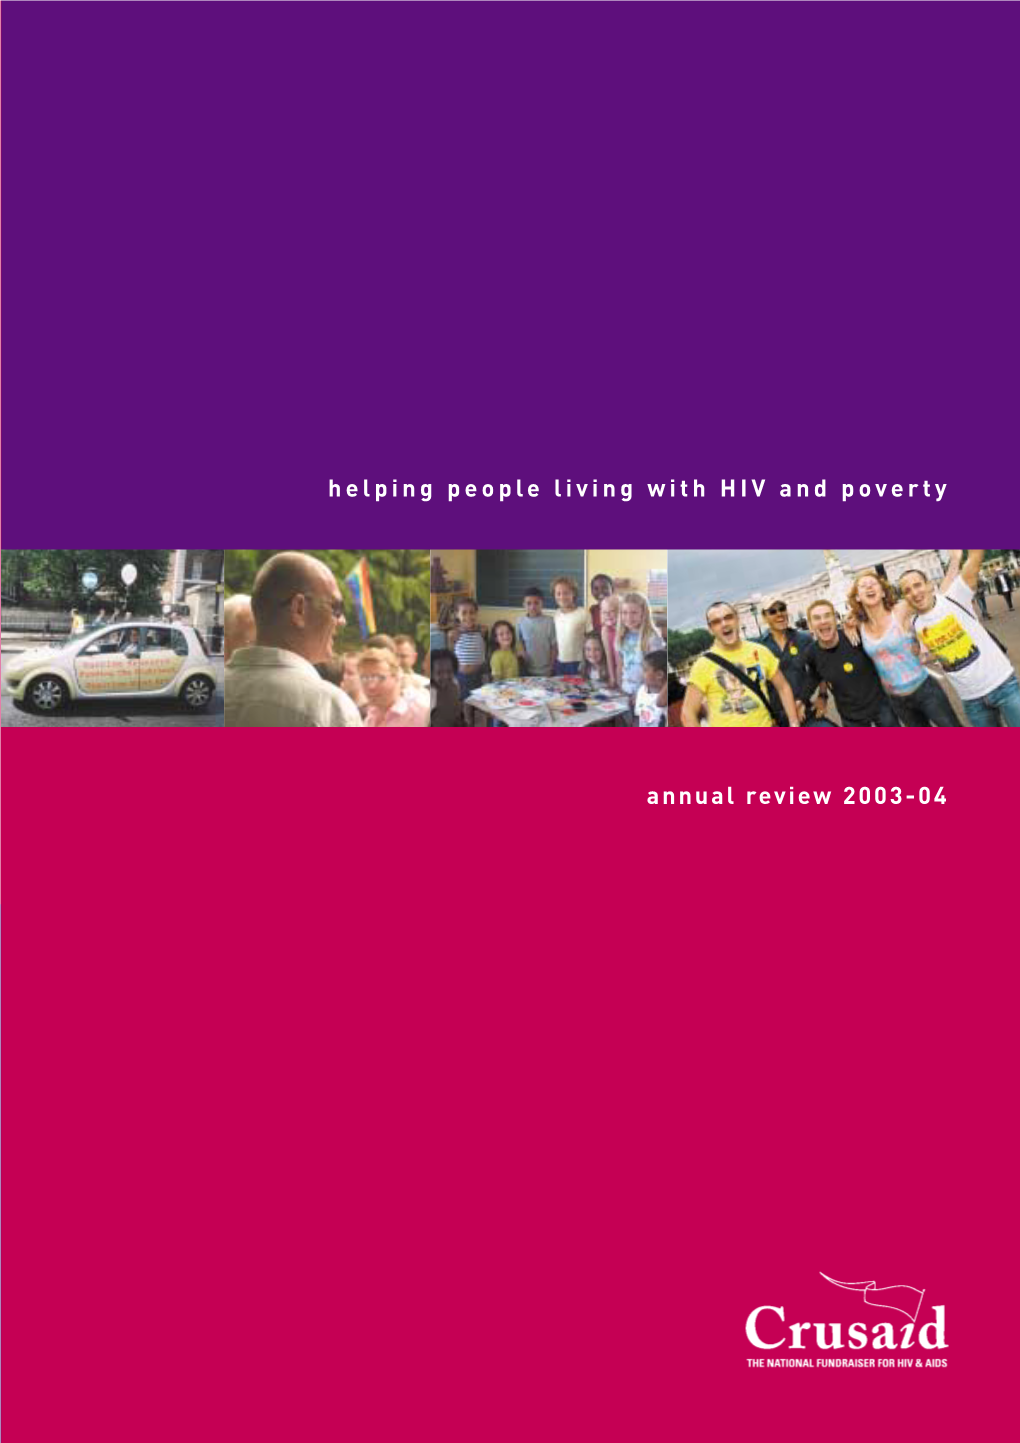 Annual Review 2003-04 Helping People Living with HIV and Poverty